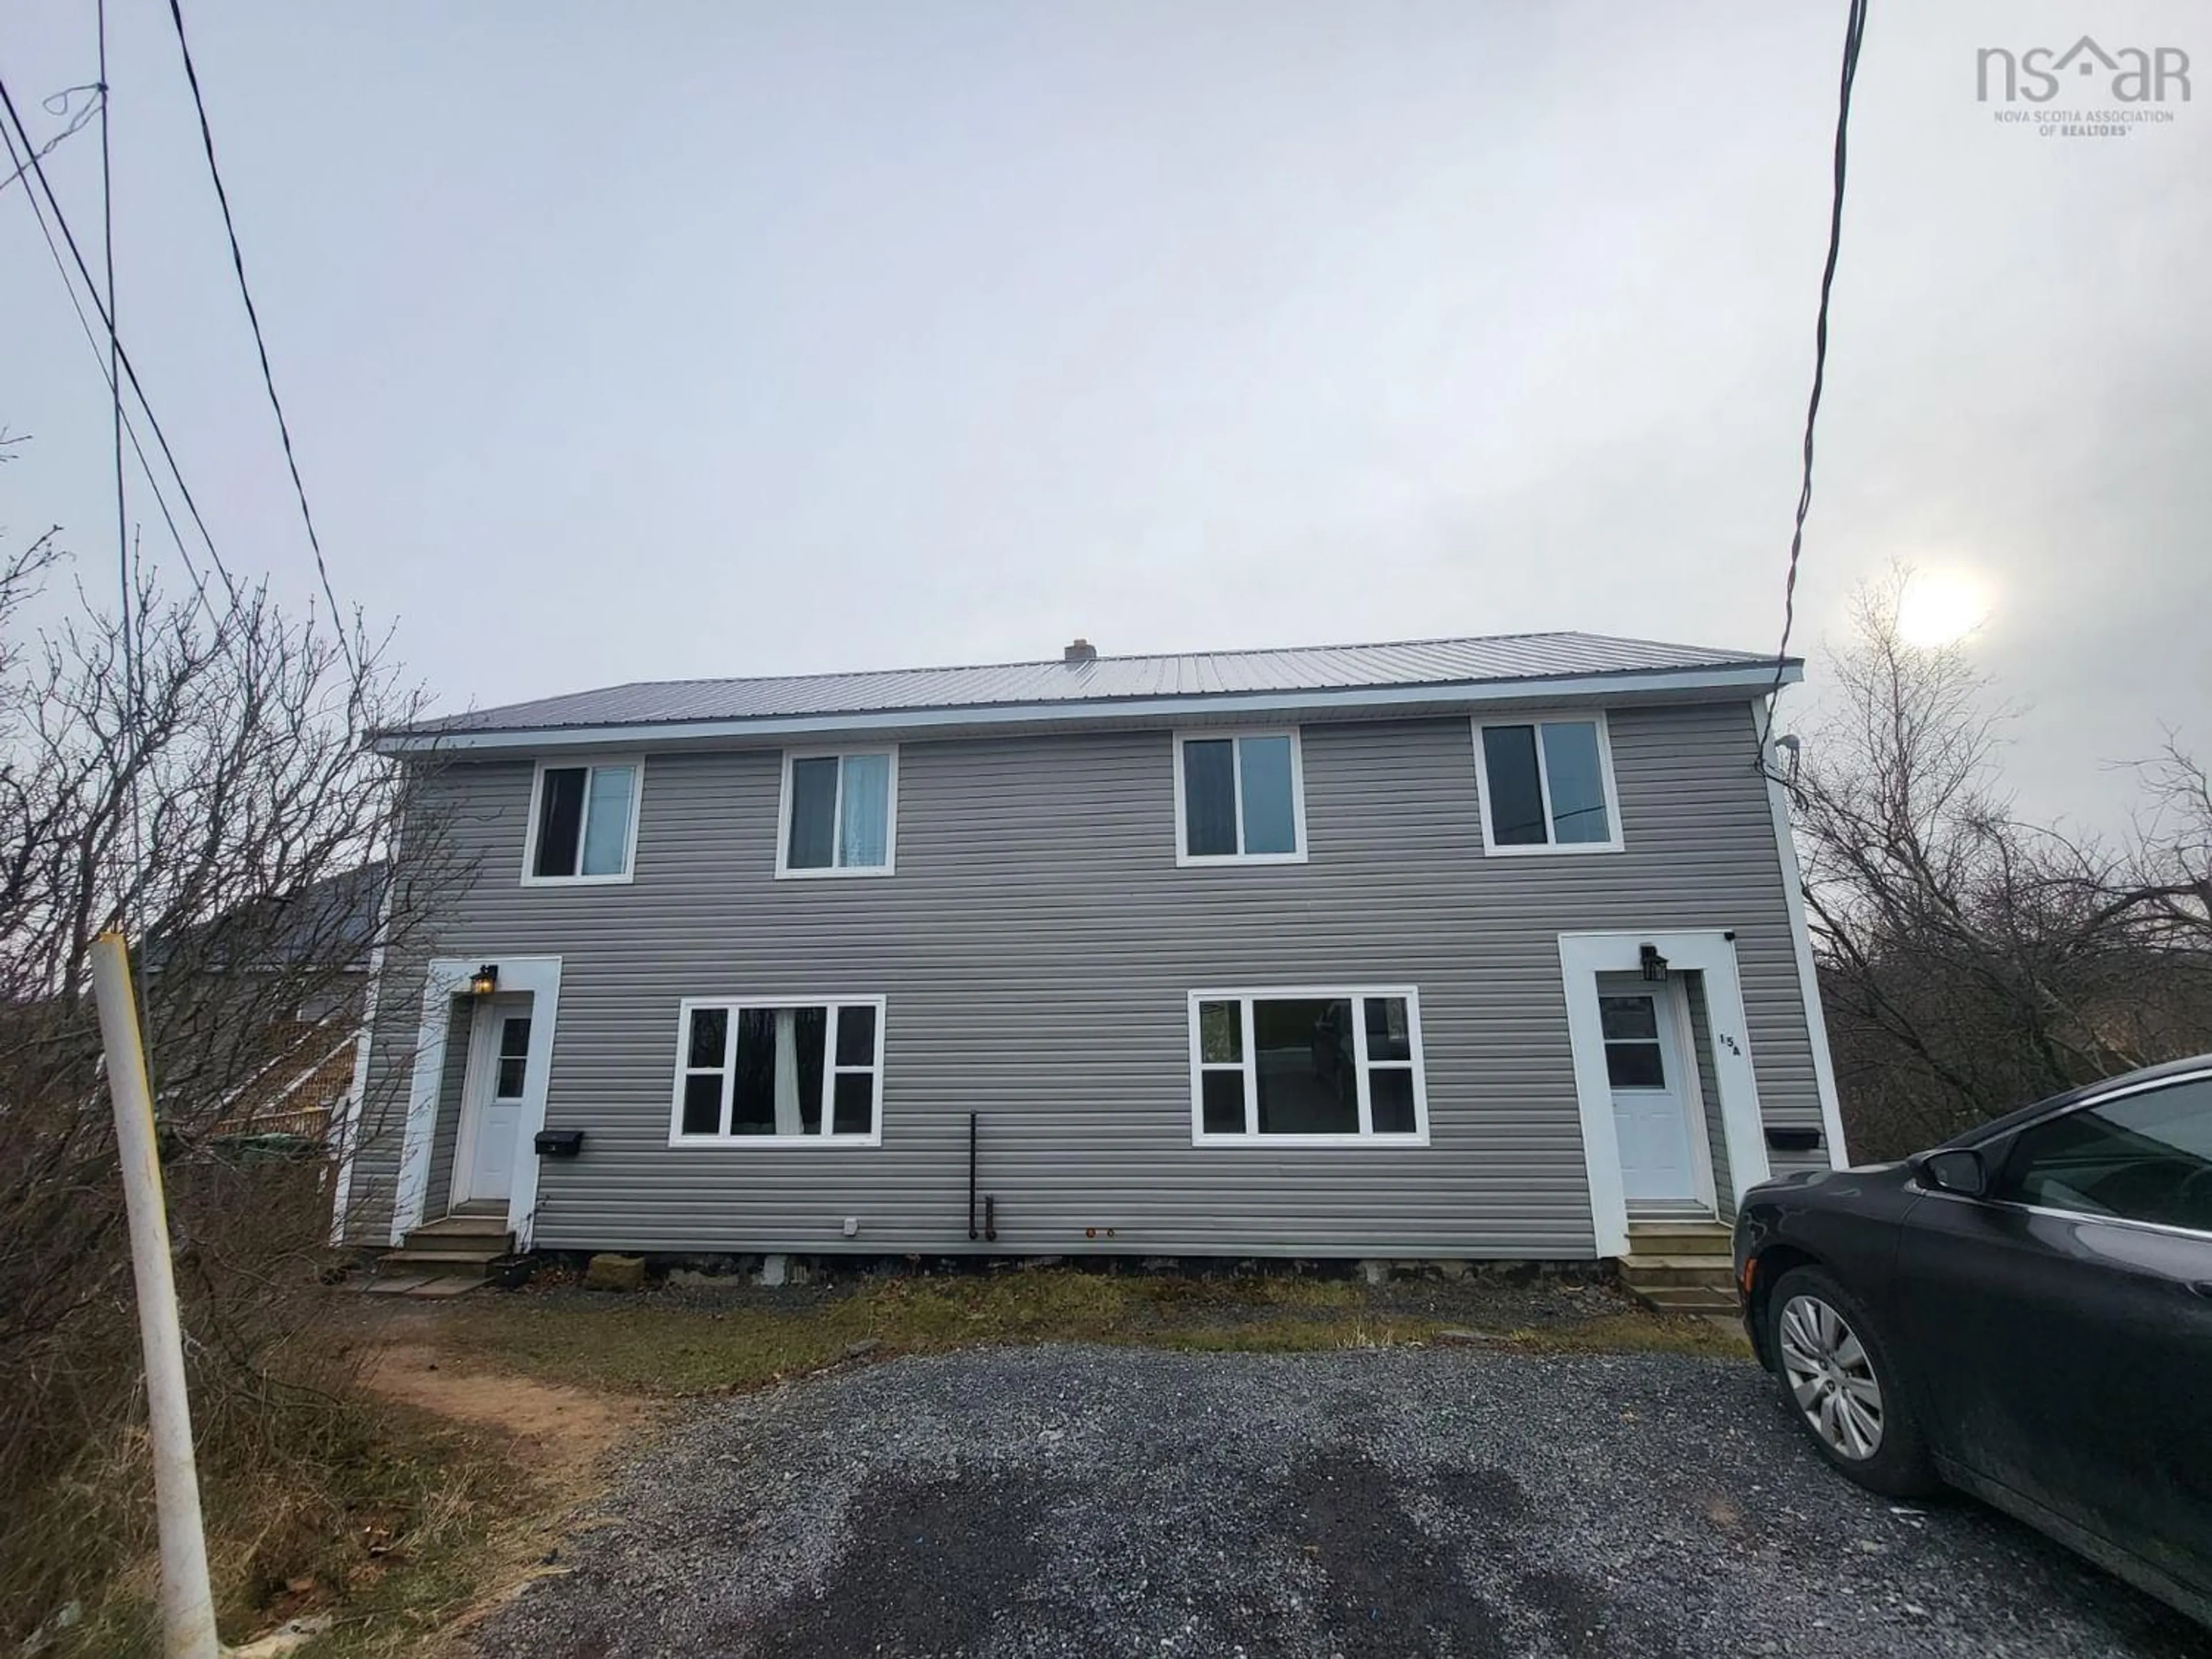 Home with unknown exterior material for 15 Marie St, Stellarton Nova Scotia B2H 5H4